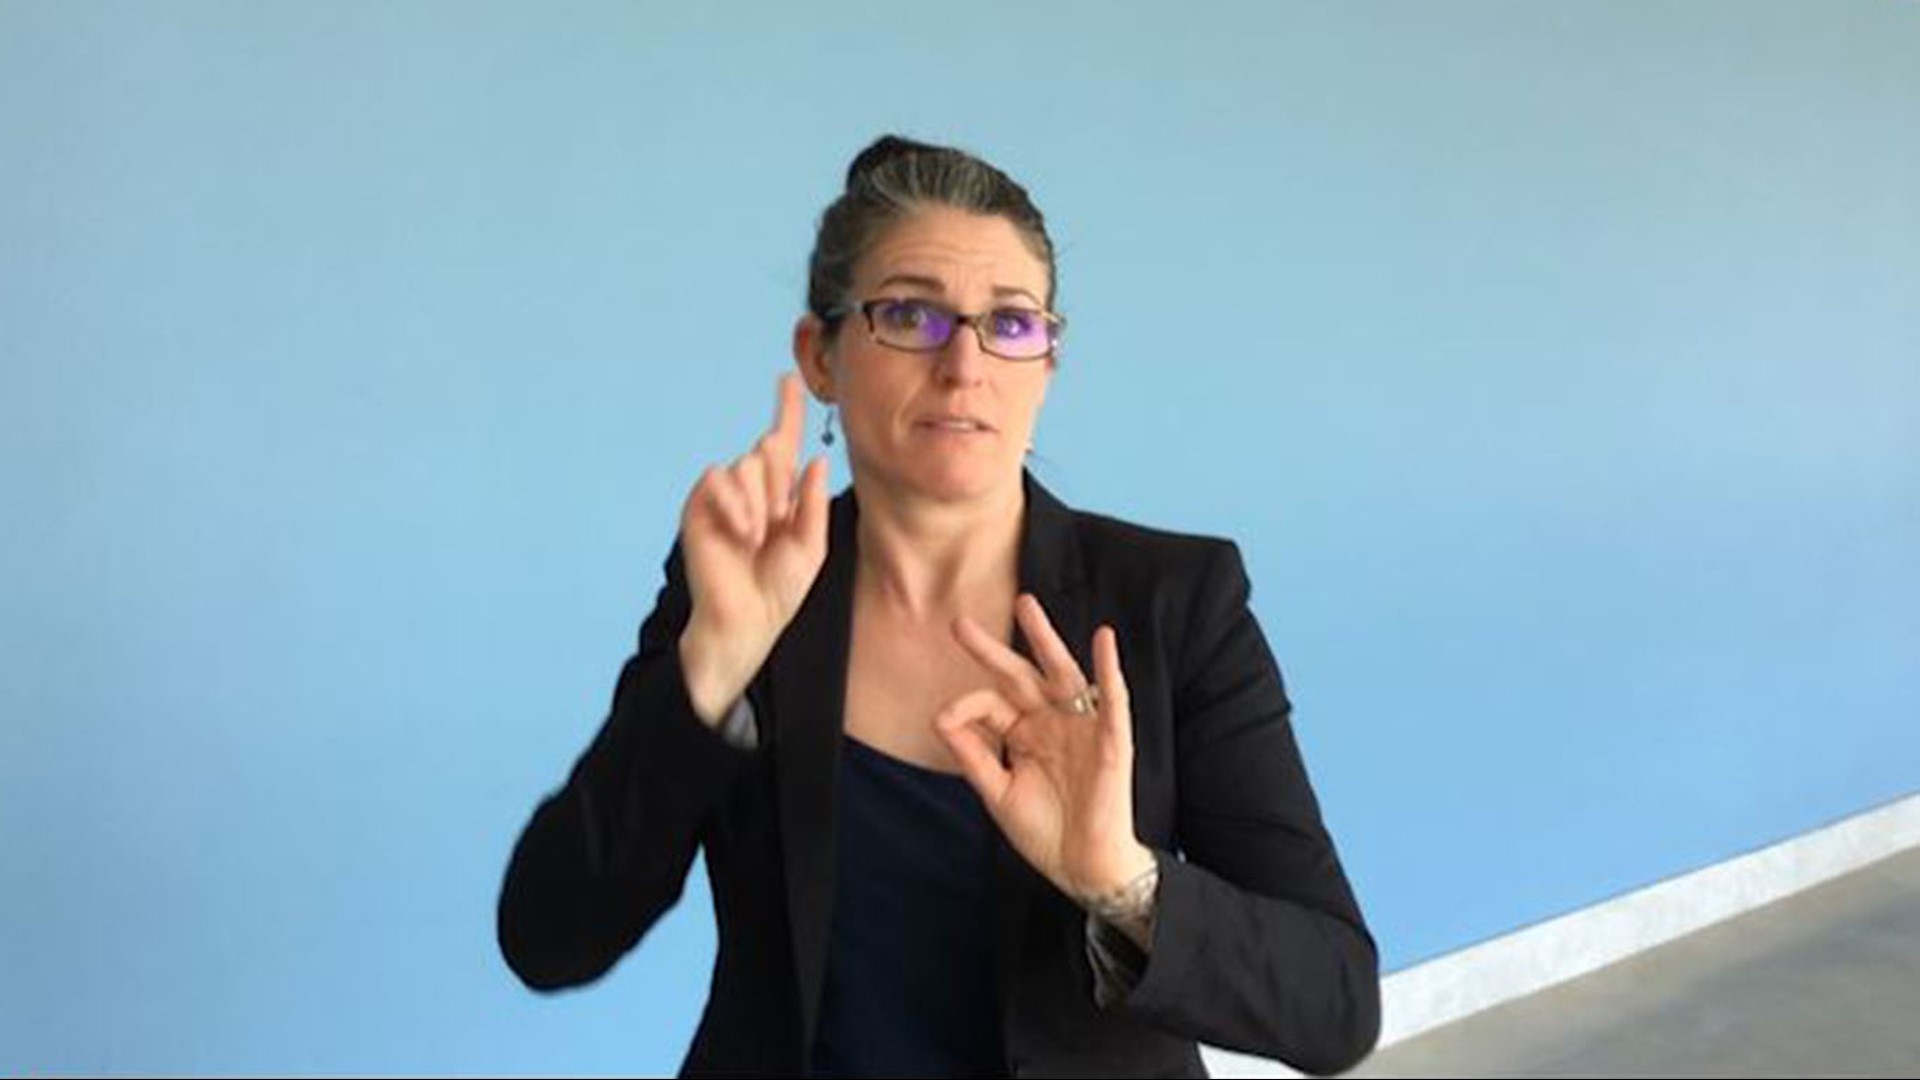 Expressive American Sign Language interpreter gains attention in Maine CDC briefings